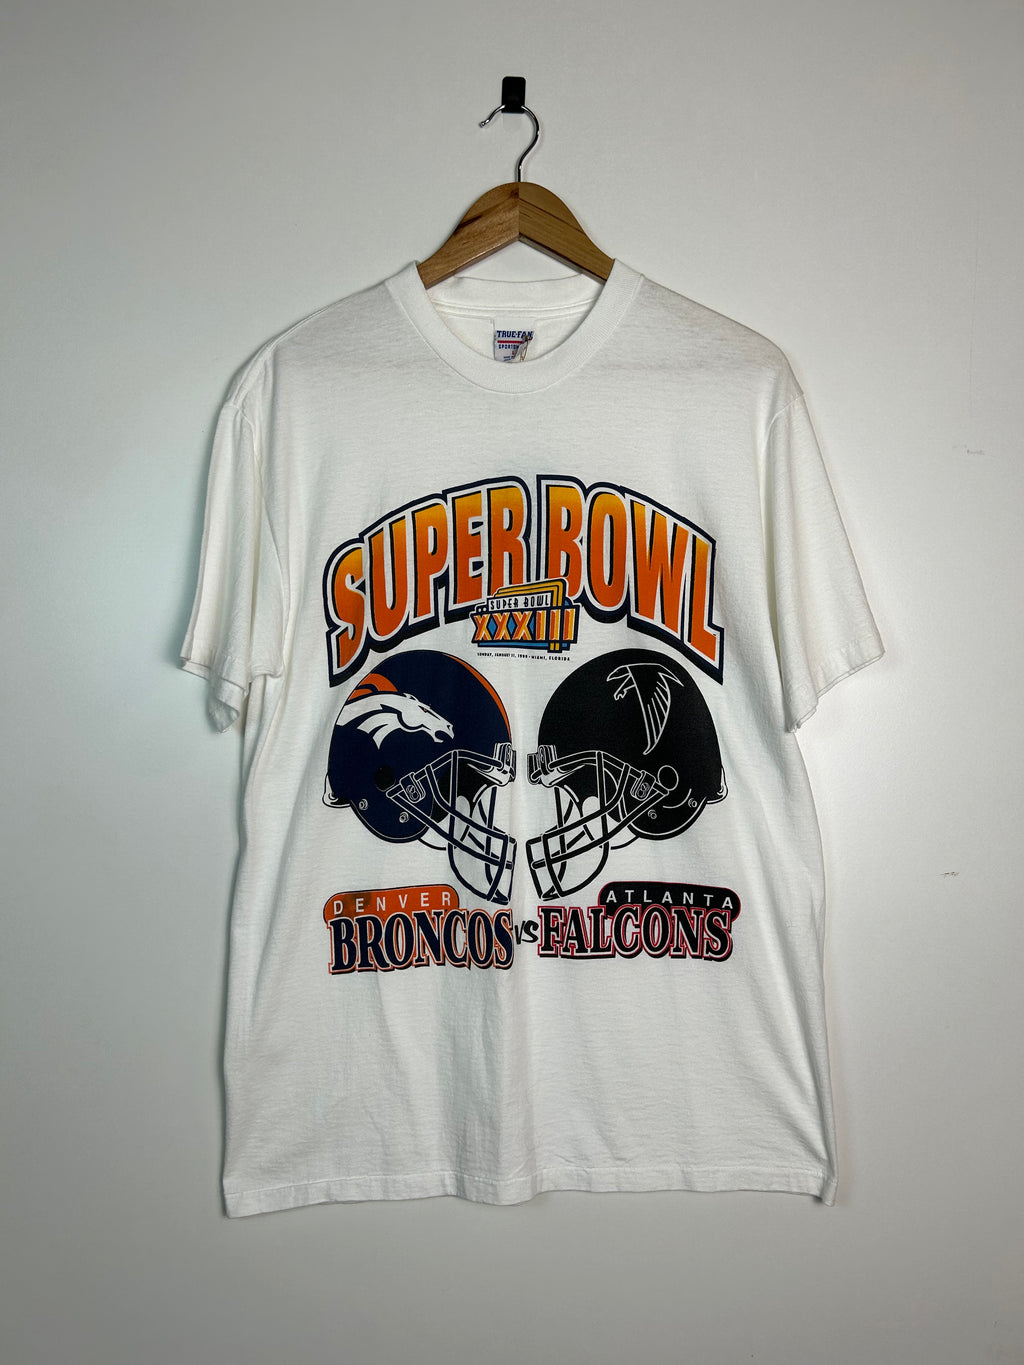 Broncos and Falcons Superbowl 1999 white tee